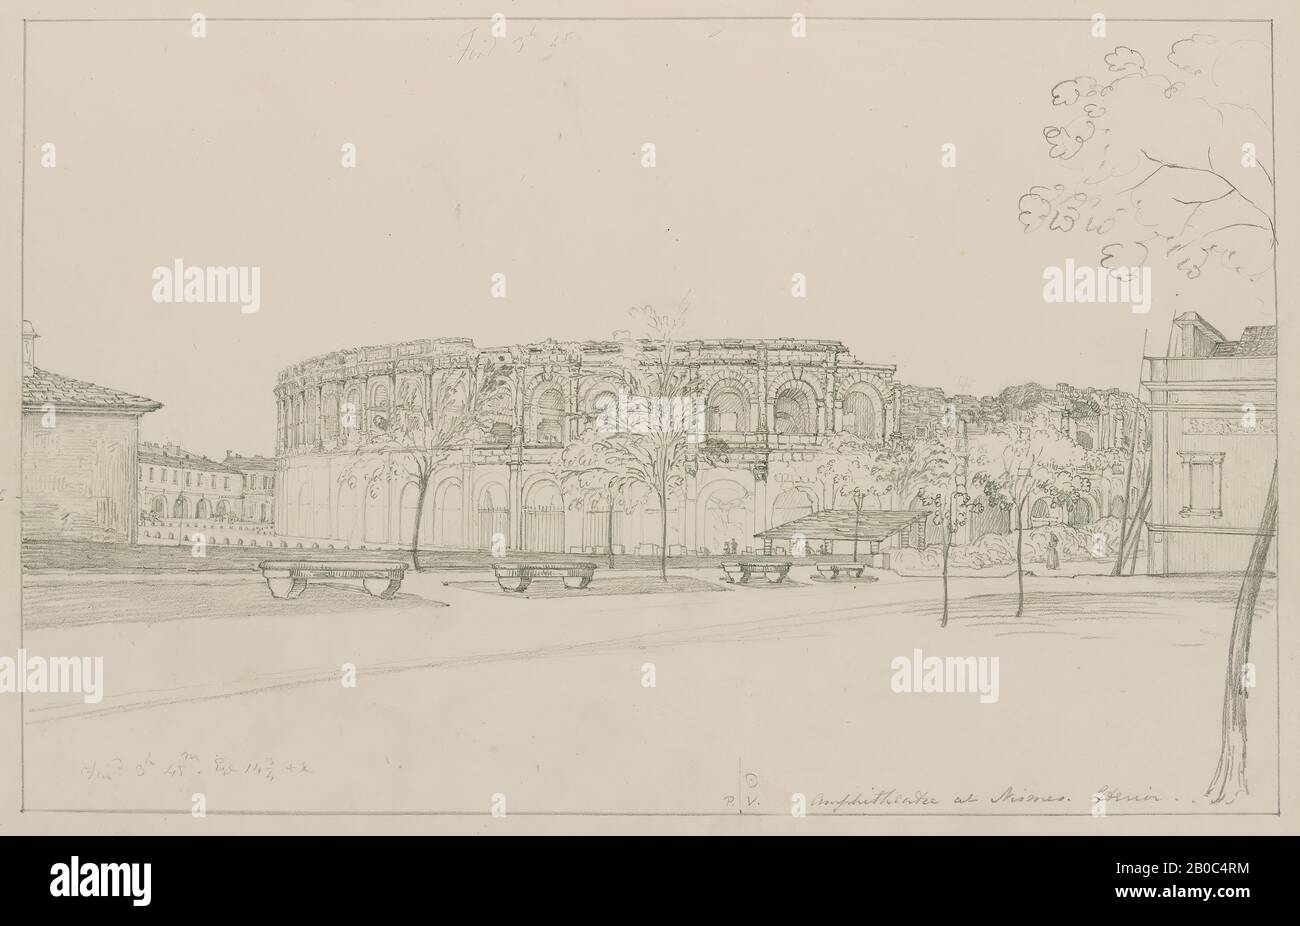 John Herschel, Exterior view of the Amphitheatre, Nimes, September 21, 1826, pencilon paper, camera lucida drawing, 9 7/8x 15 3/16 in. (25.1x 38.6 cm), Sir John Herschel was one of the most accomplished men of science in nineteenth-century Britain. He was especially famous as an astronomer, but also worked in math, chemistry, and botany. As a meticulous draftsman, he created drawings of botanical specimens, landscapes, and the built environment, often aided by the use of an optical device known as a camera lucida. This drawing depicts the ancient Roman amphitheater in Nimes, France. Built in t Stock Photo